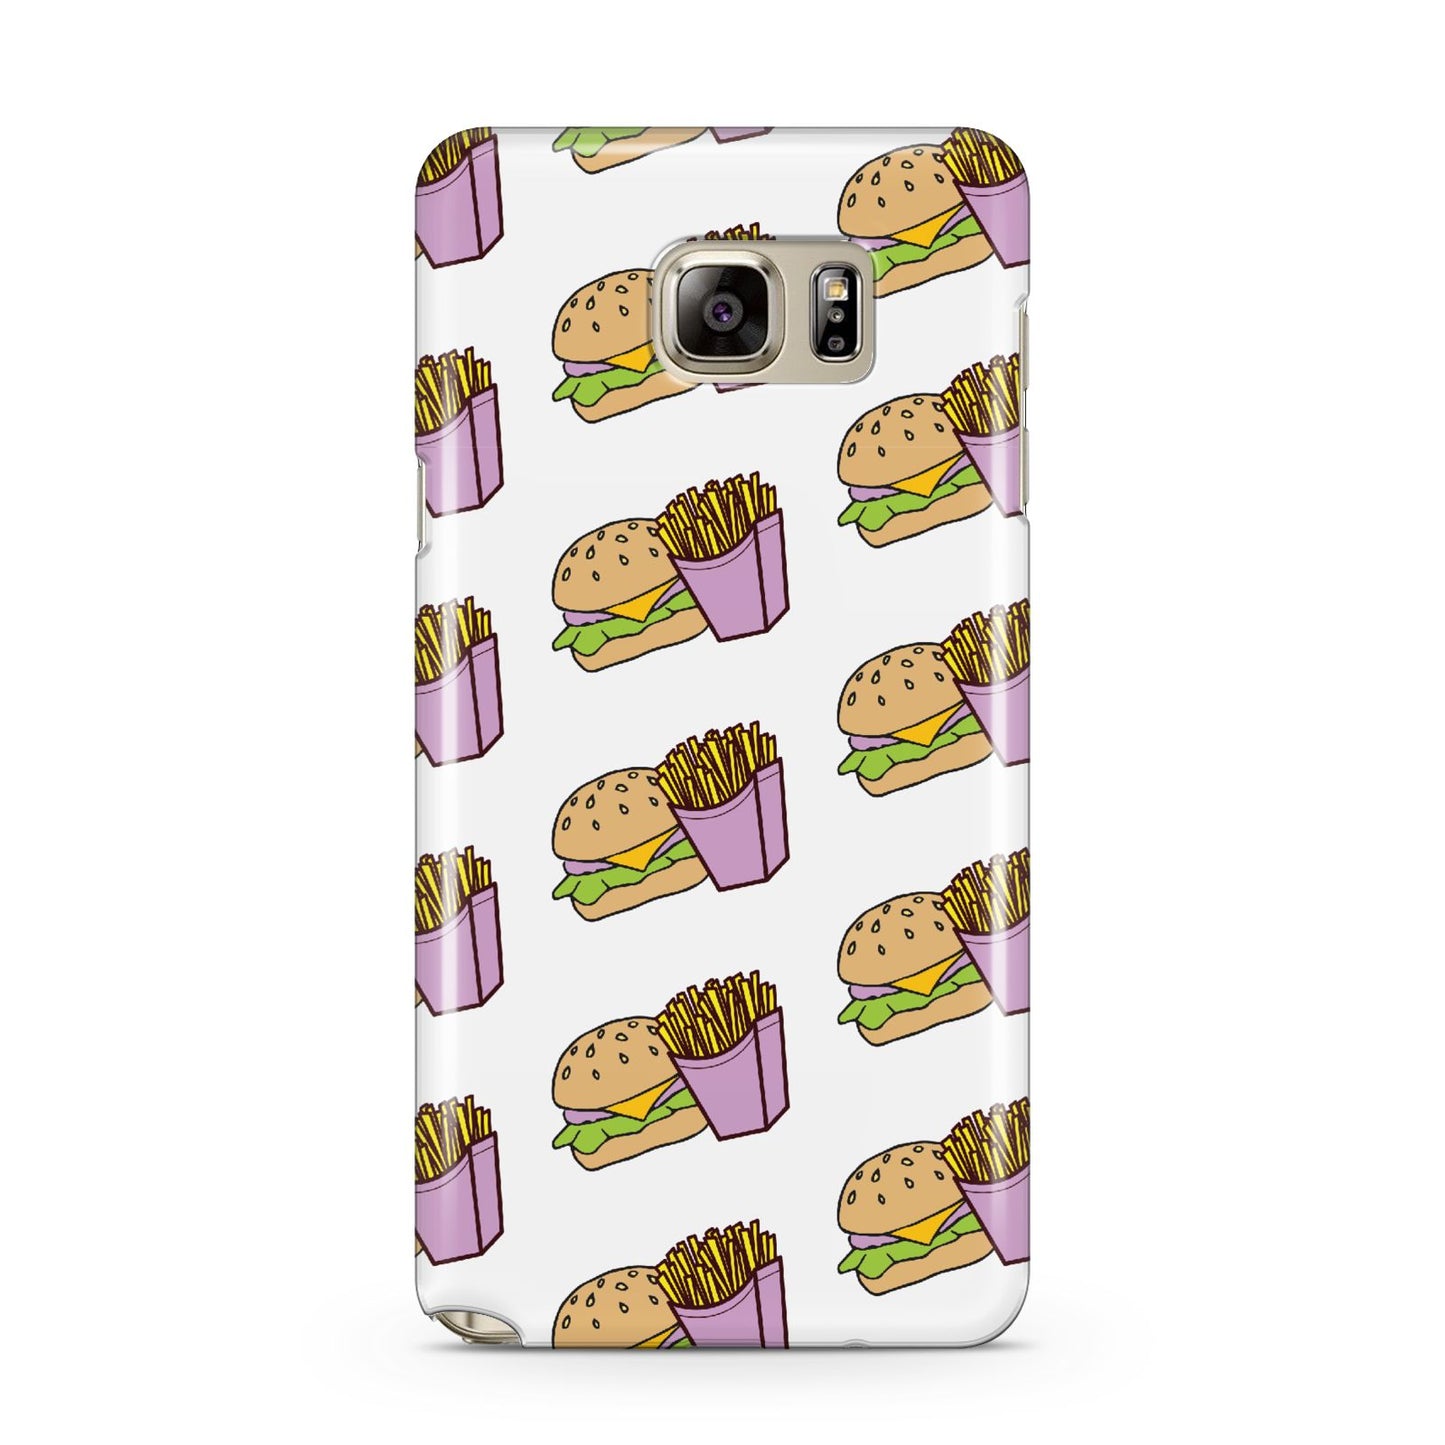 Burger Fries Fast Food Samsung Galaxy Note 5 Case